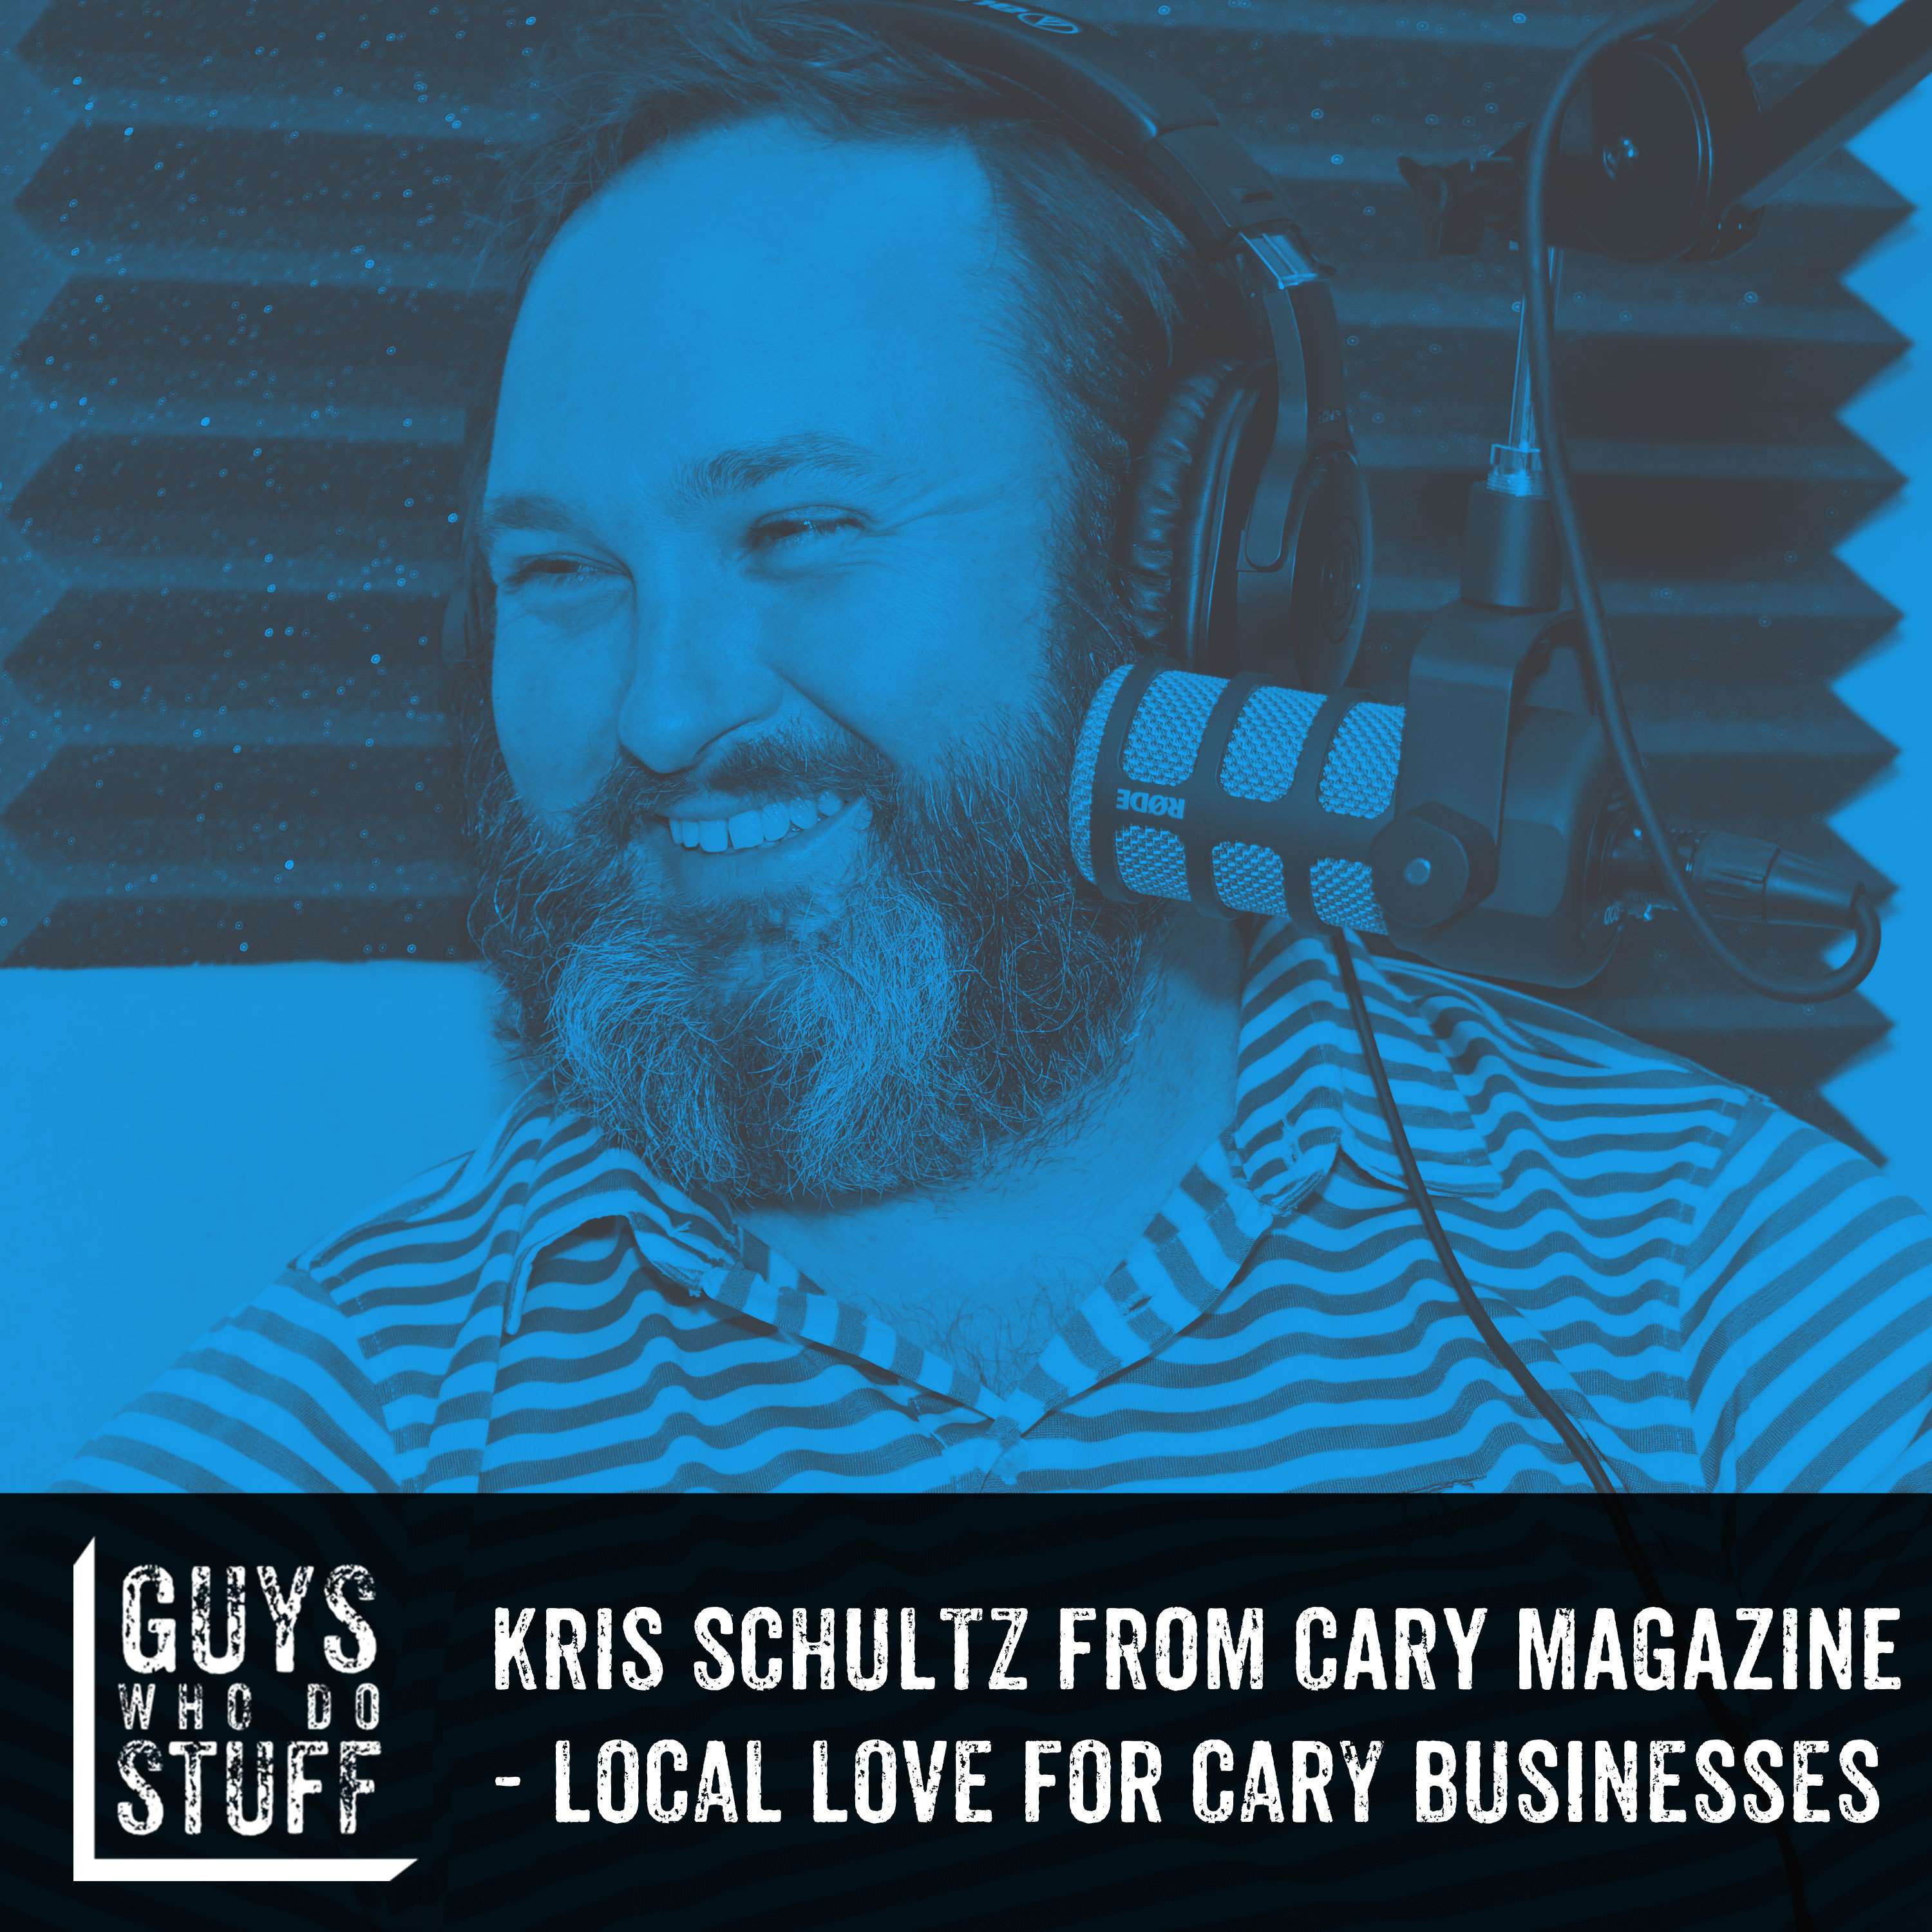 Kris Schultz from Cary Magazine - Local Love for Cary Businesses